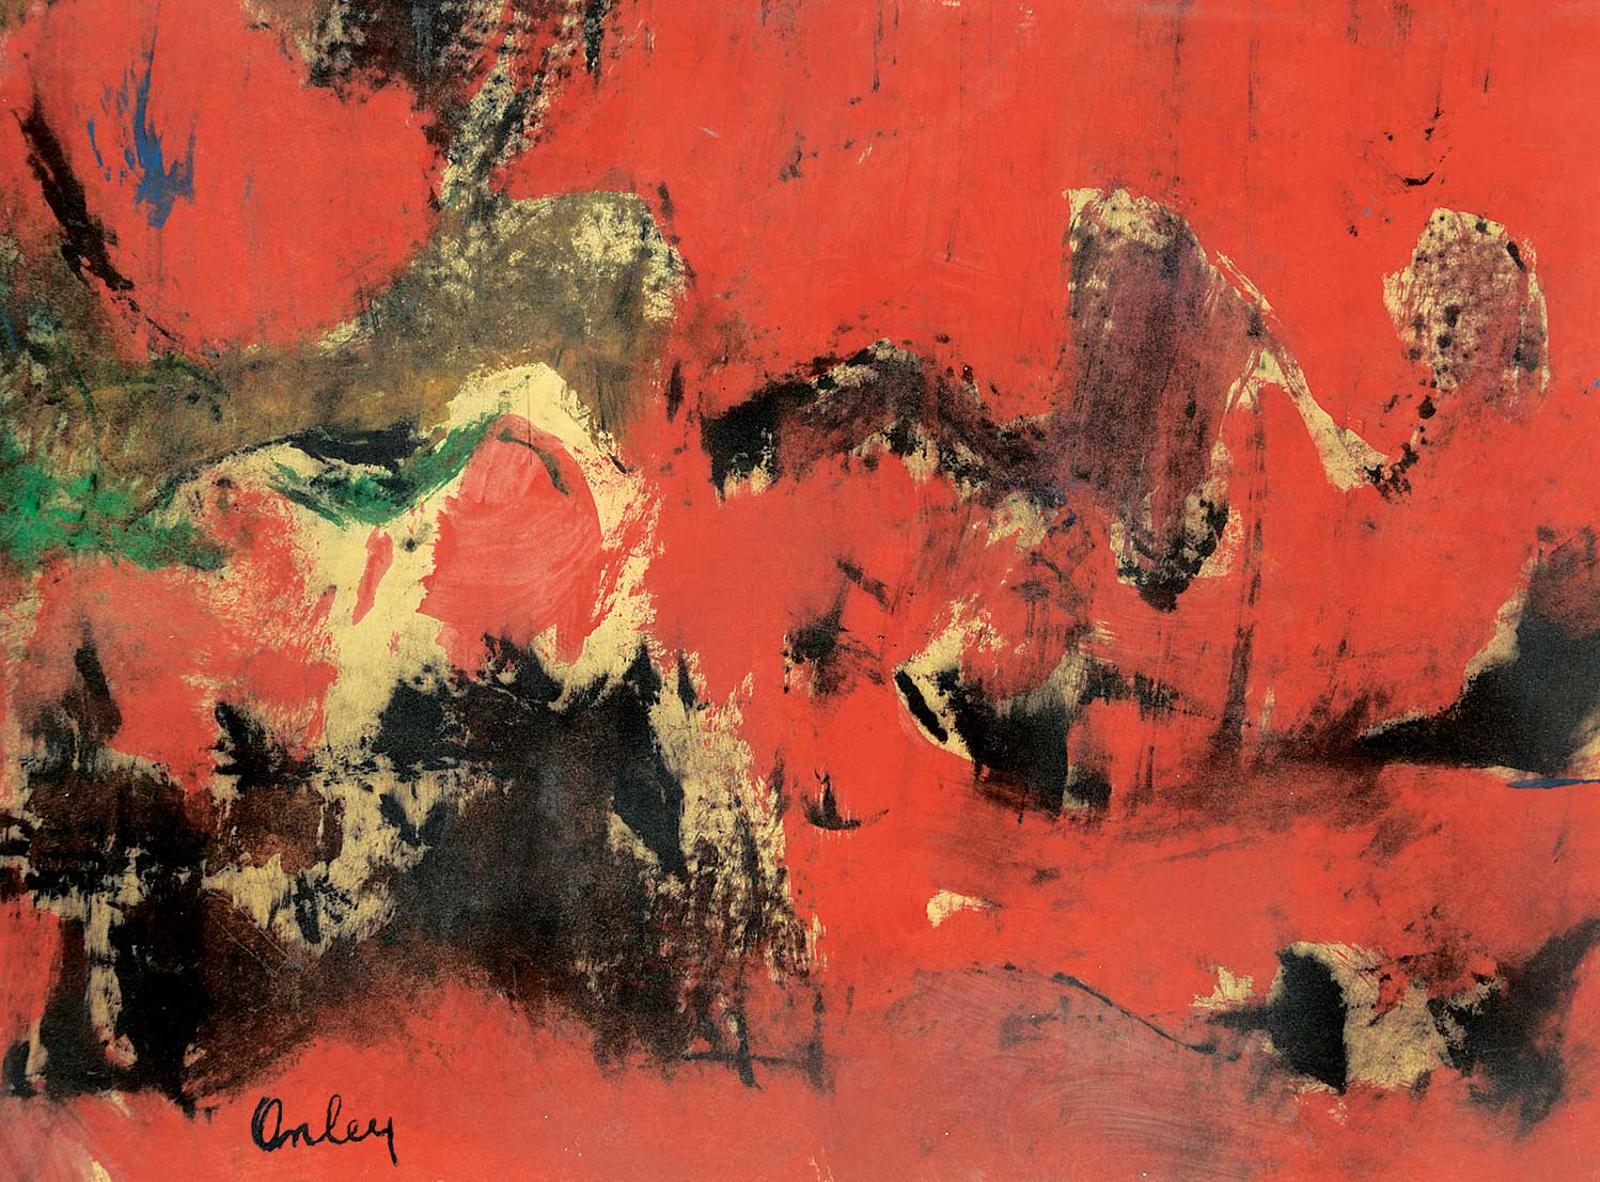 Norman Anthony (Toni) Onley (1928-2004) - Untitled - Abstract Sea of Red